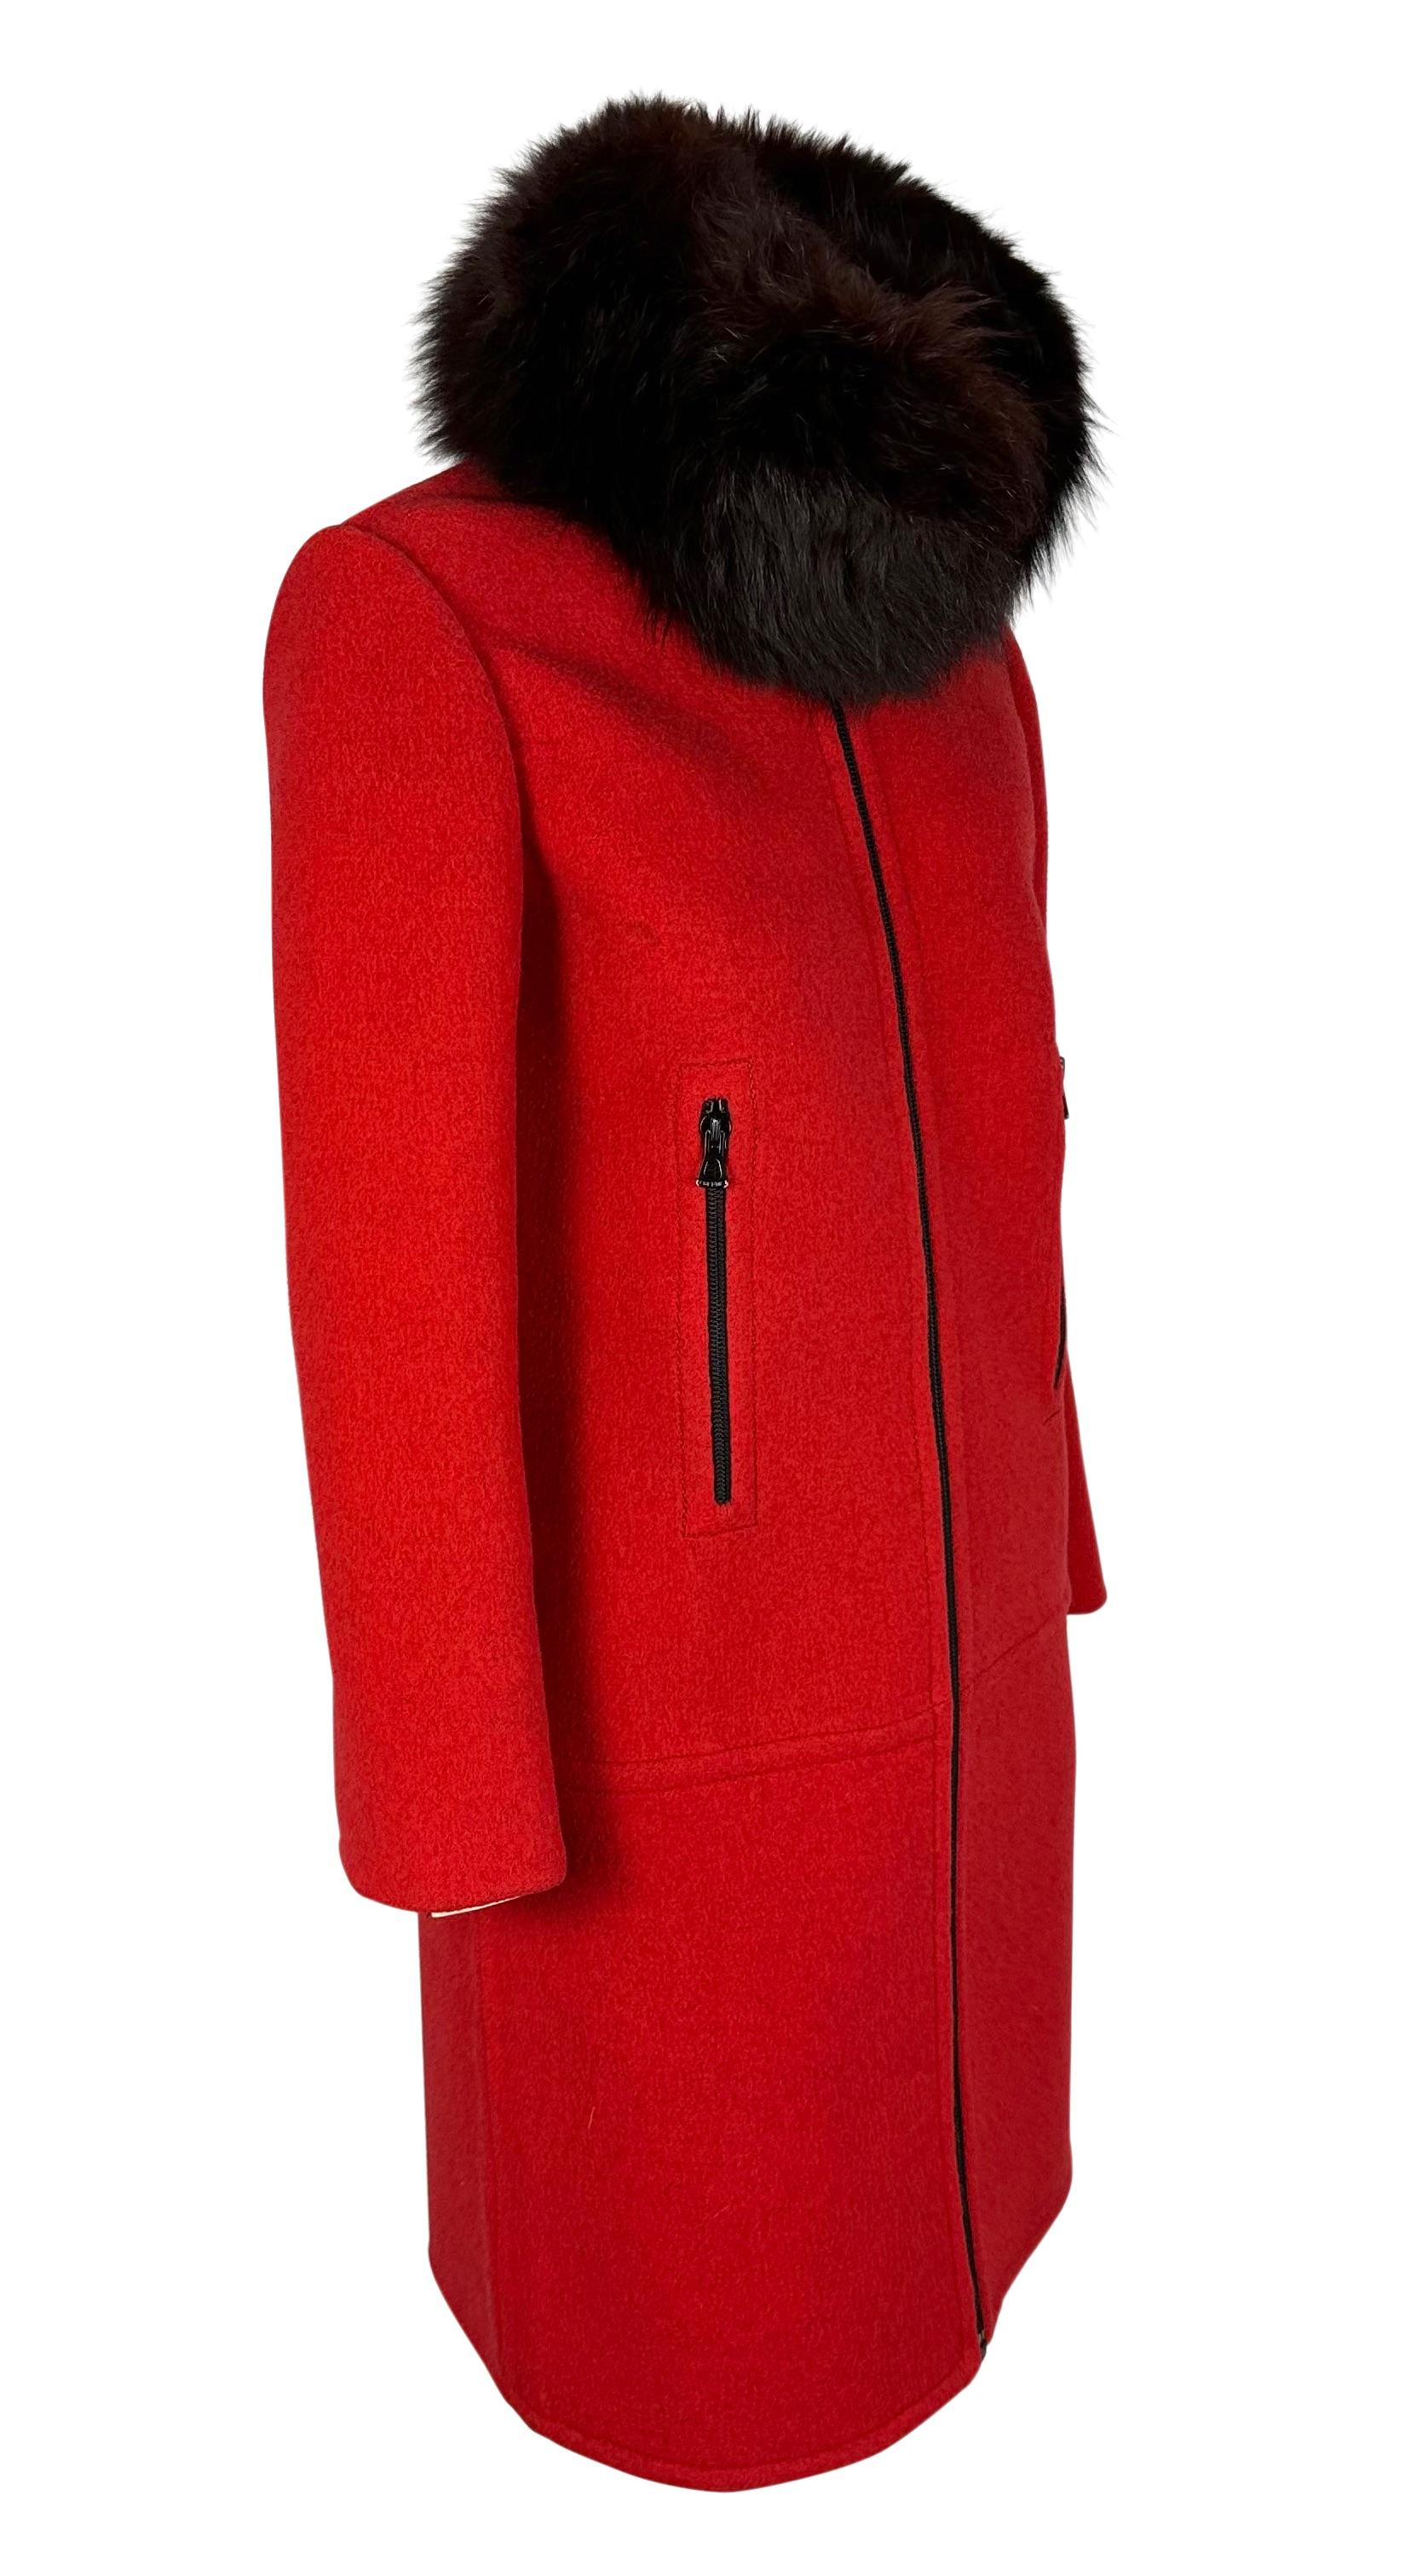 F/W 1969 Christian Dior Haute Couture Red Wool Fur Collar Jacket  In Excellent Condition For Sale In West Hollywood, CA